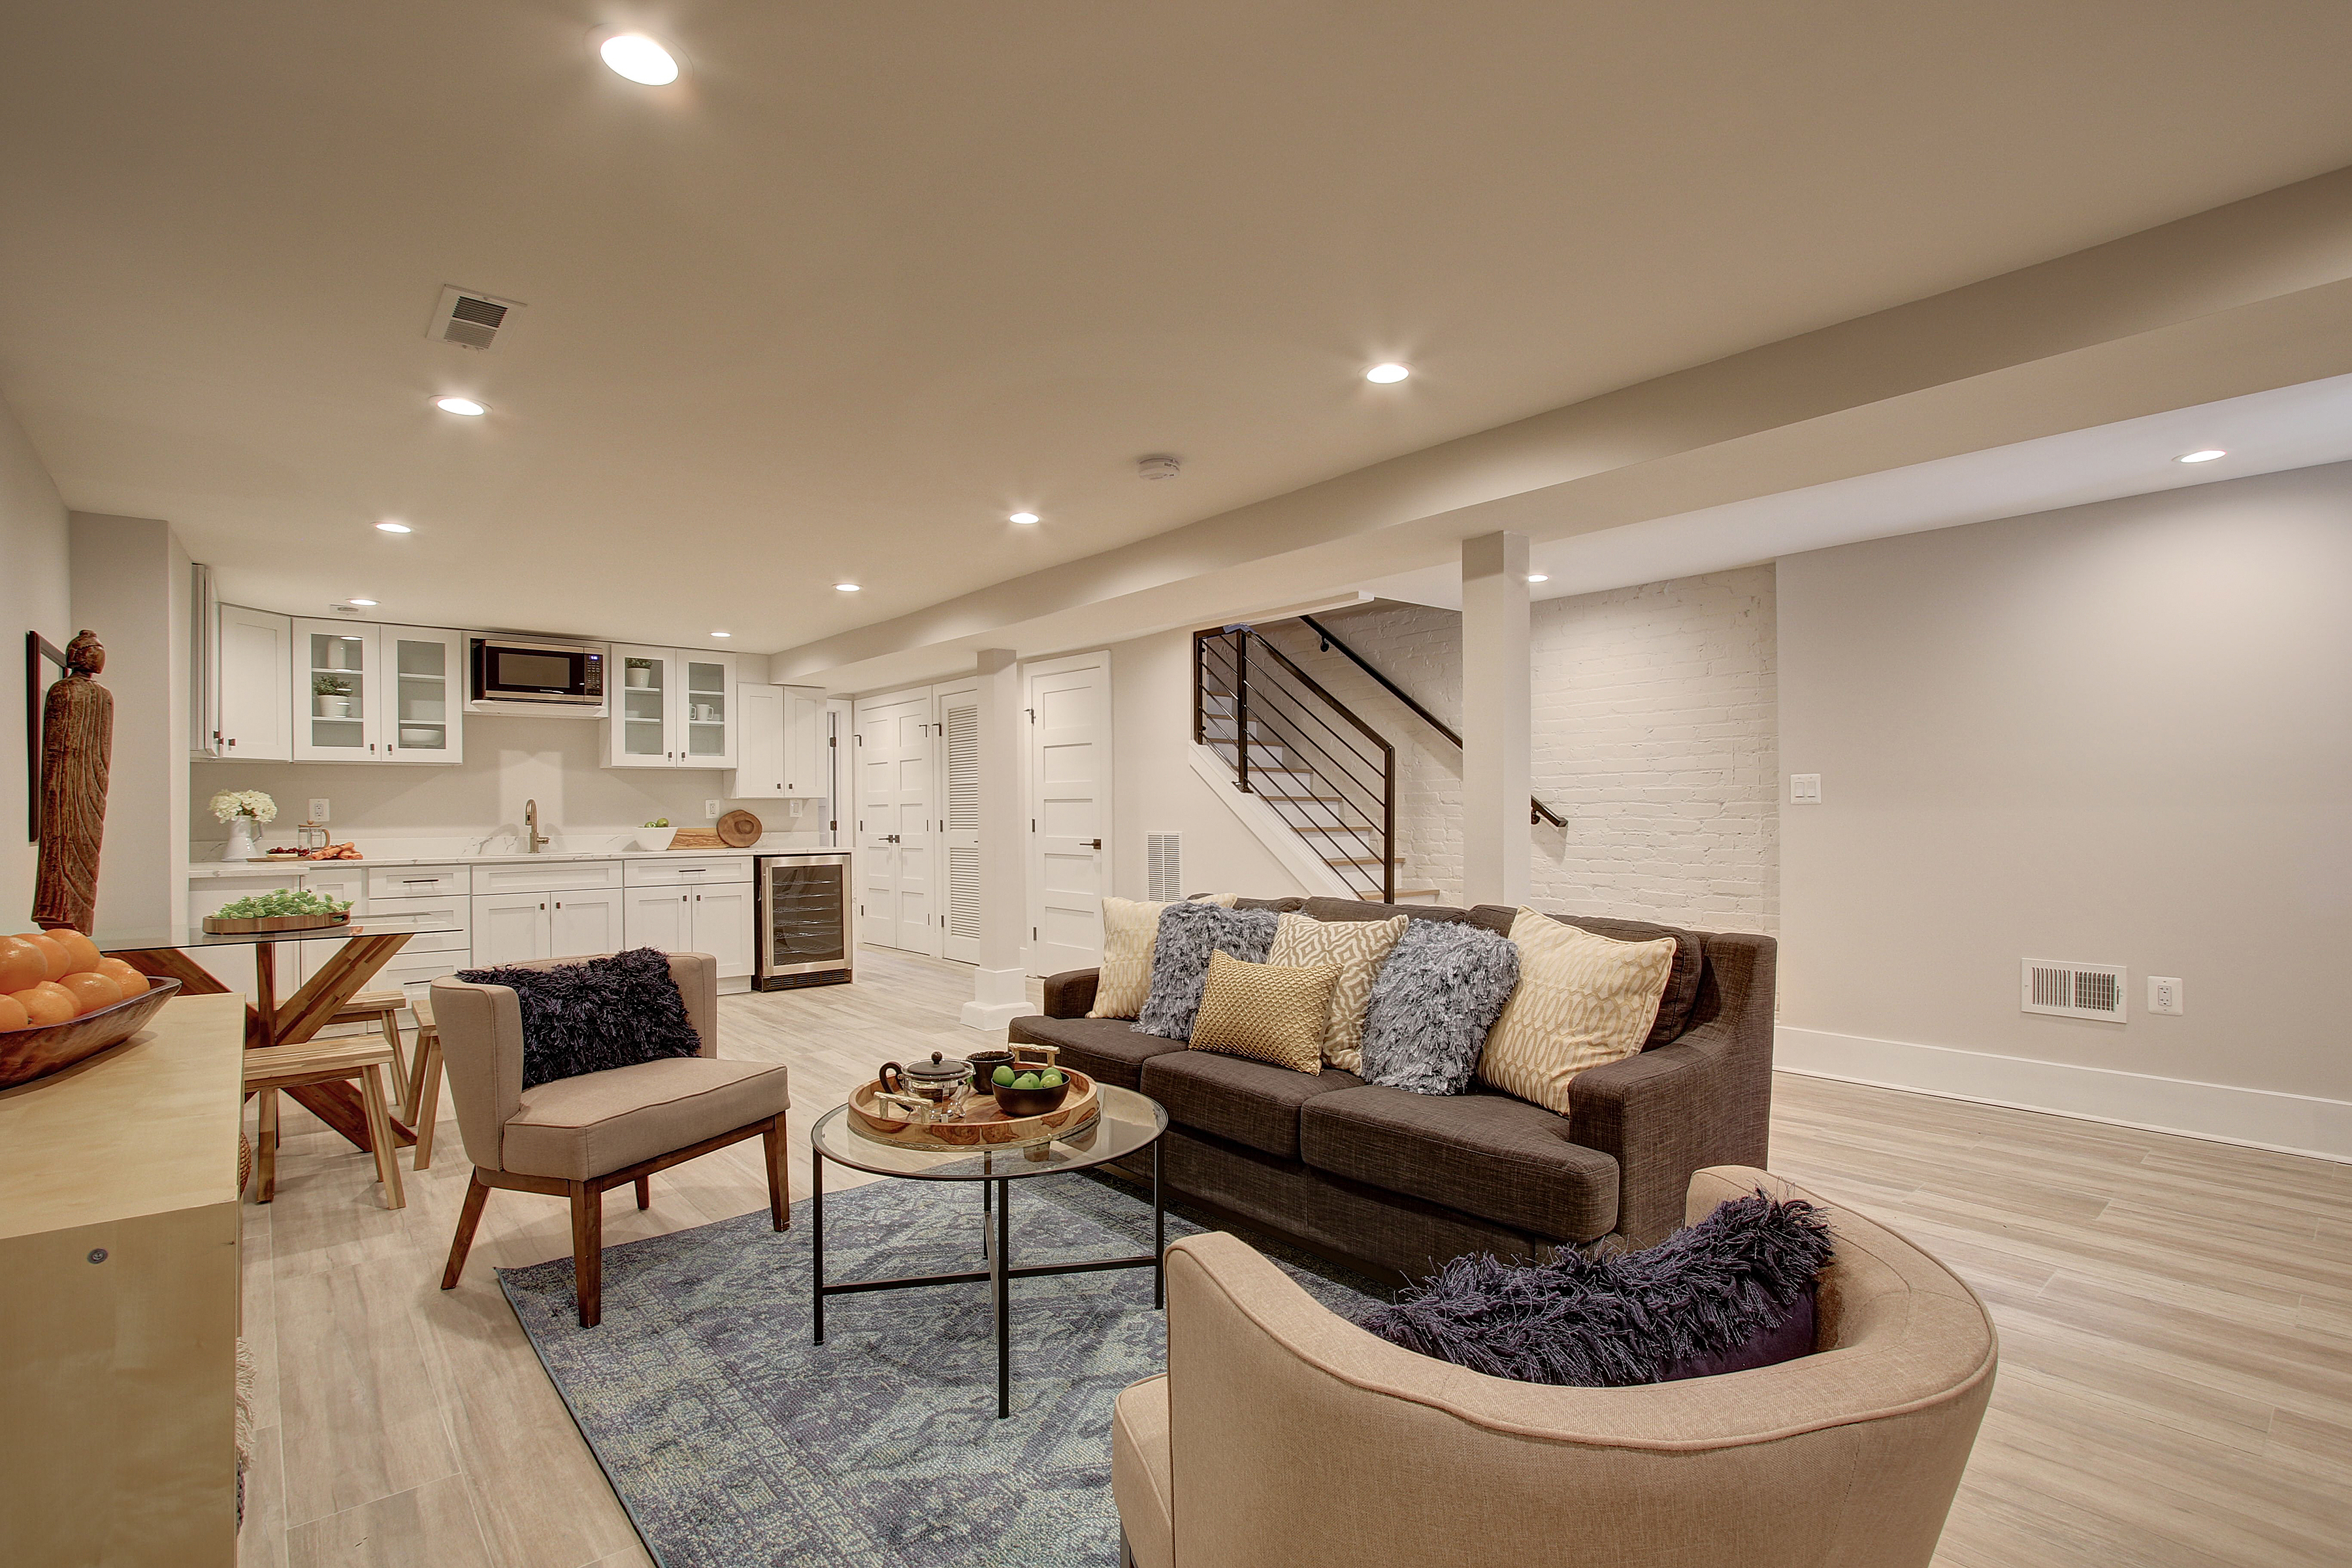 Basement finishing is an excellent way to maximize your home's square footage and add functionality.